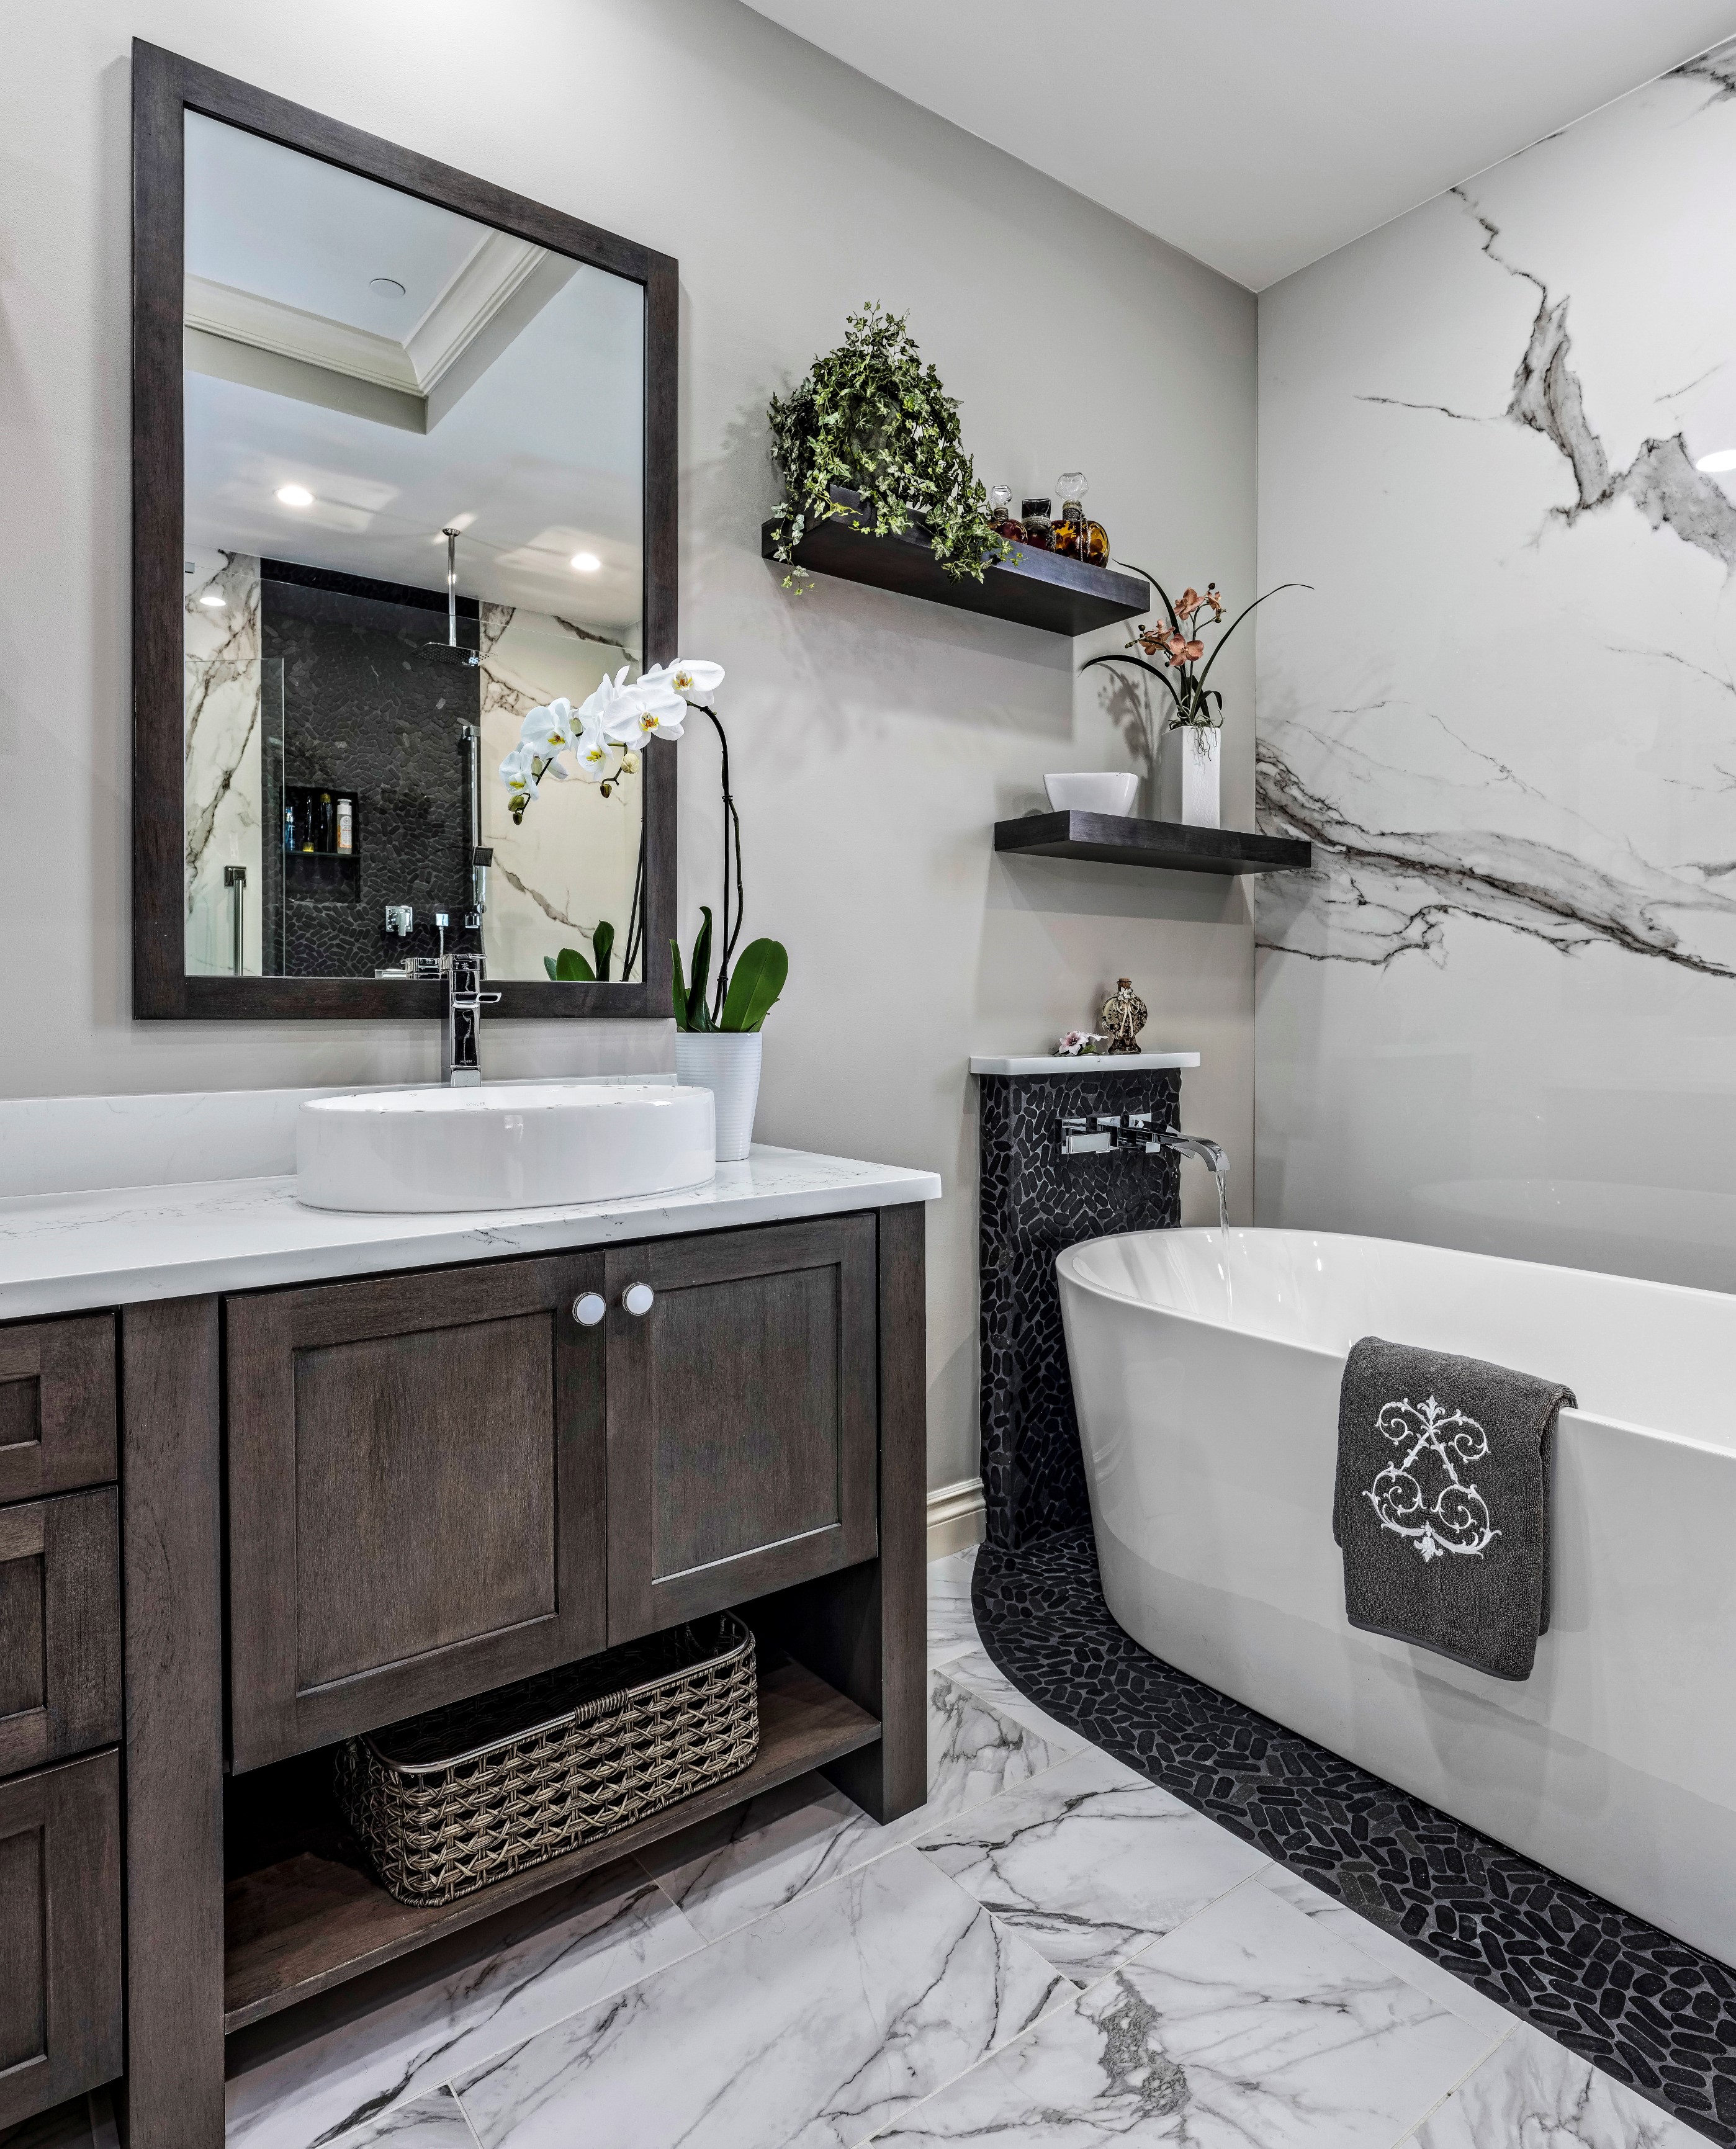 Bathroom Remodeling Typically Cost, Cost Bathroom Remodel